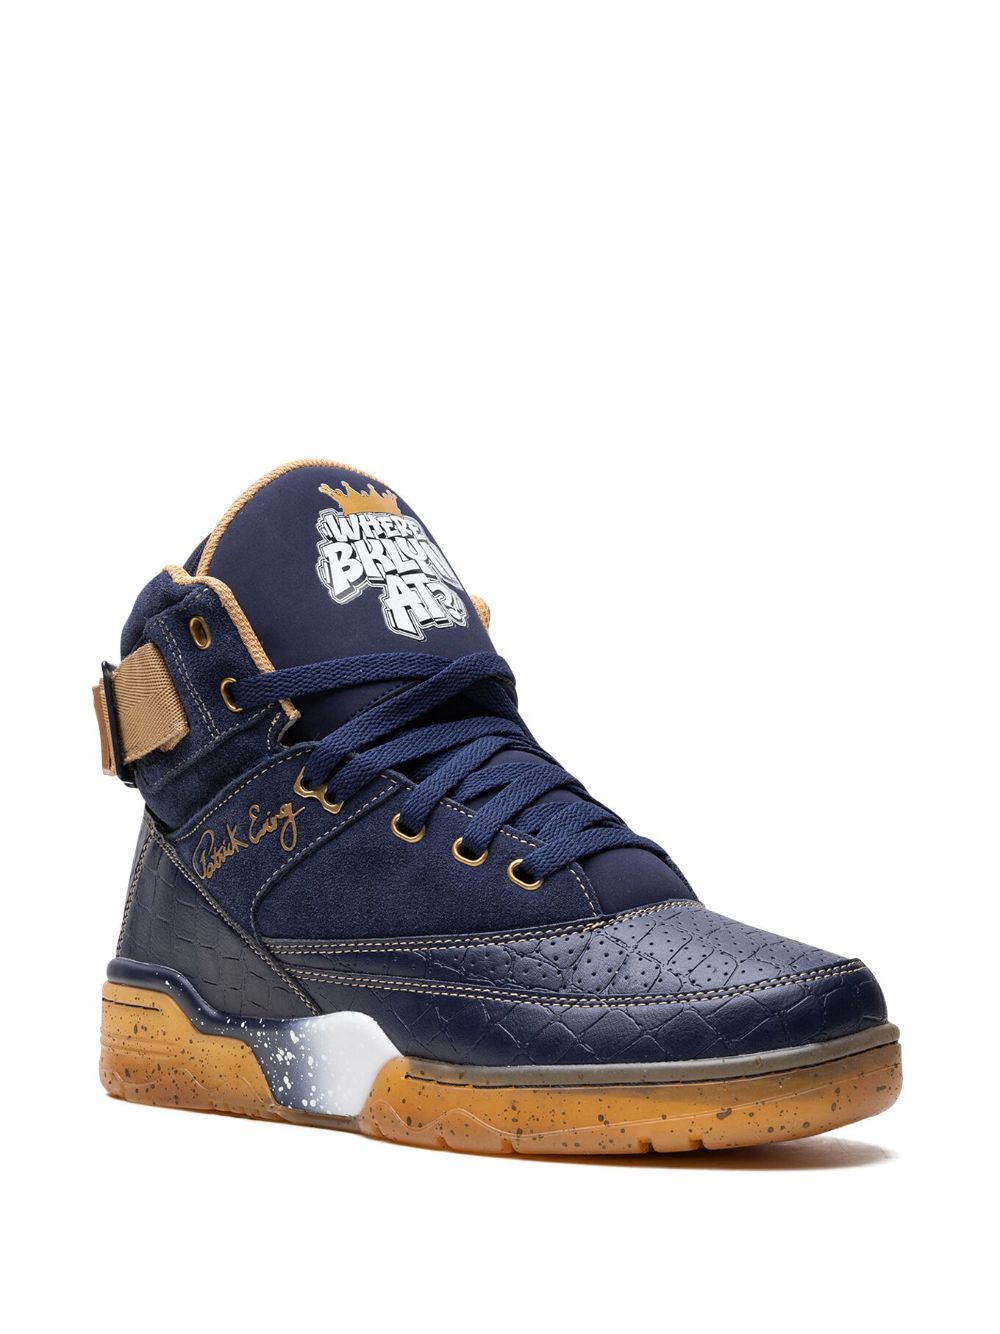 Shop Ewing 33 "where Brookly At?" High-top Sneakers In Blue